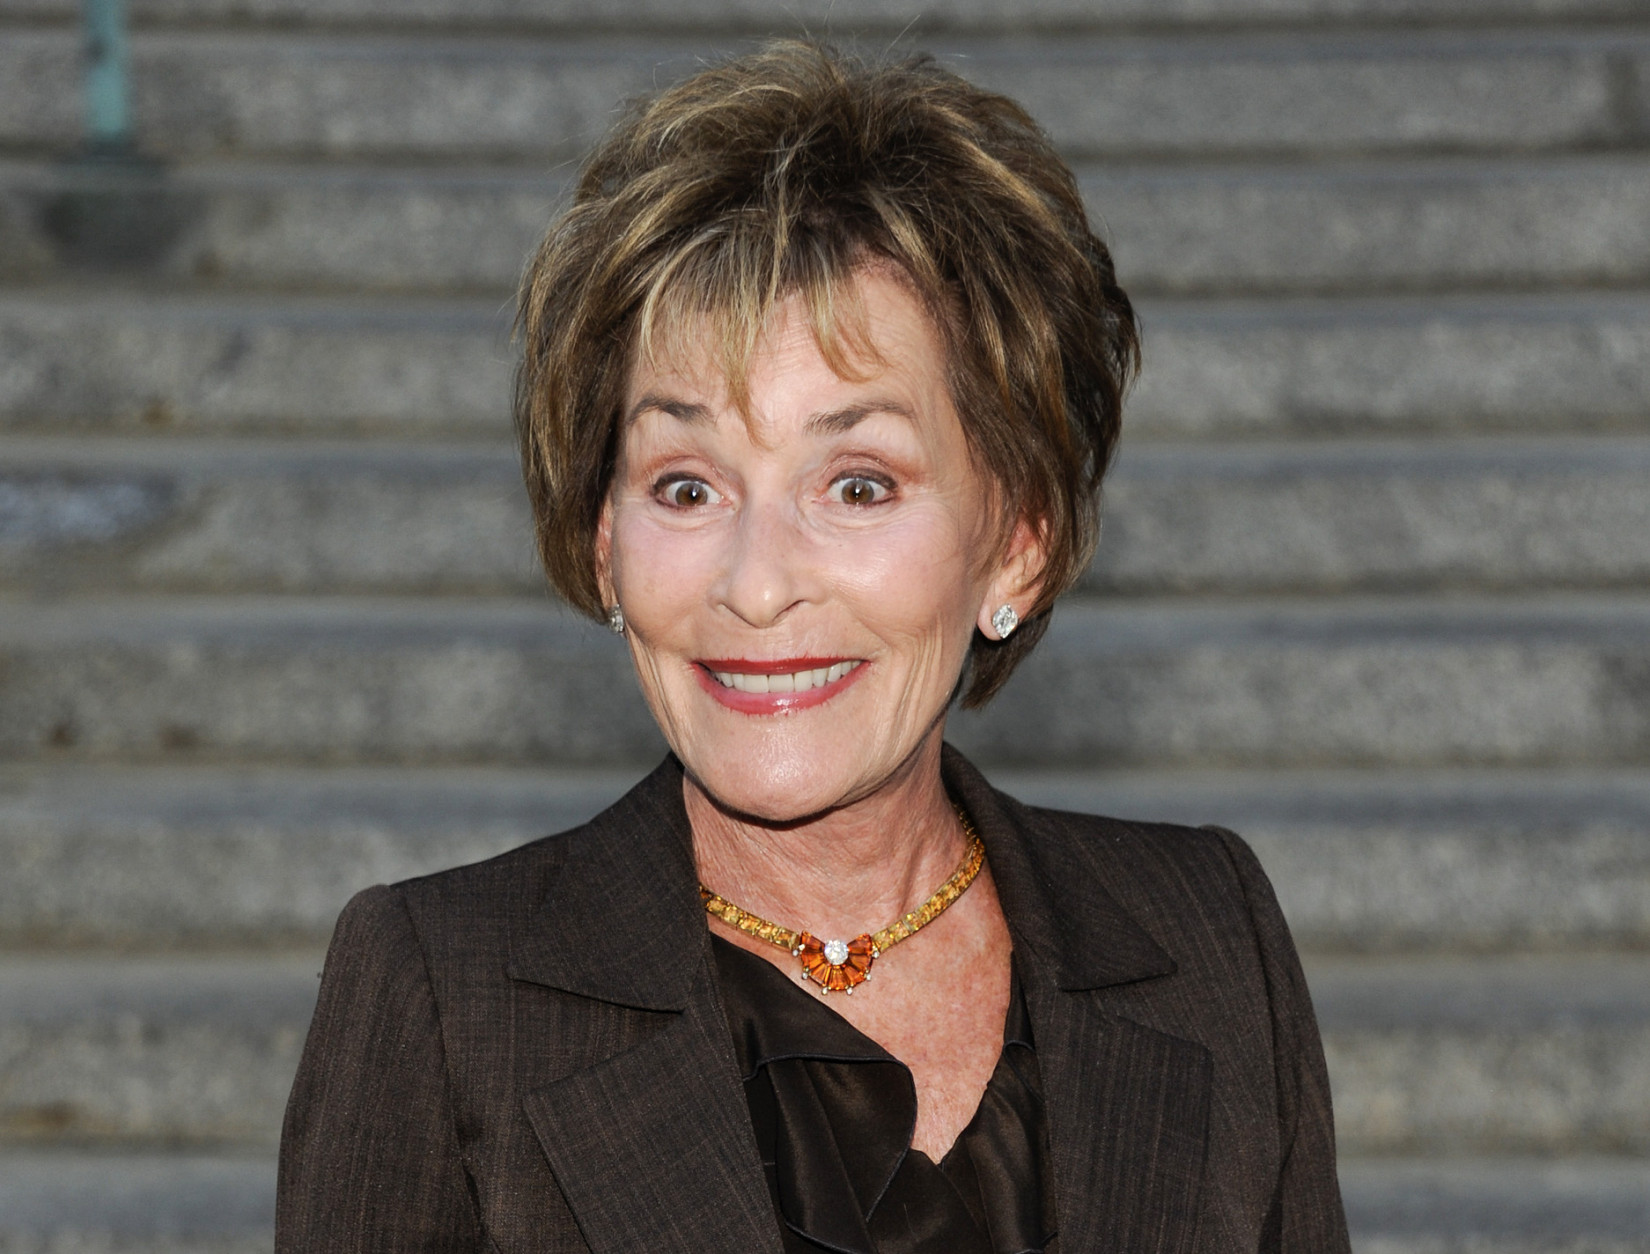 FILE - In this April 17, 2012 file photo, Judge Judy Sheindlin attends the Vanity Fair Tribeca Film Festival party at the State Supreme Courthouse in New York. (AP Photo/Evan Agostini, file )